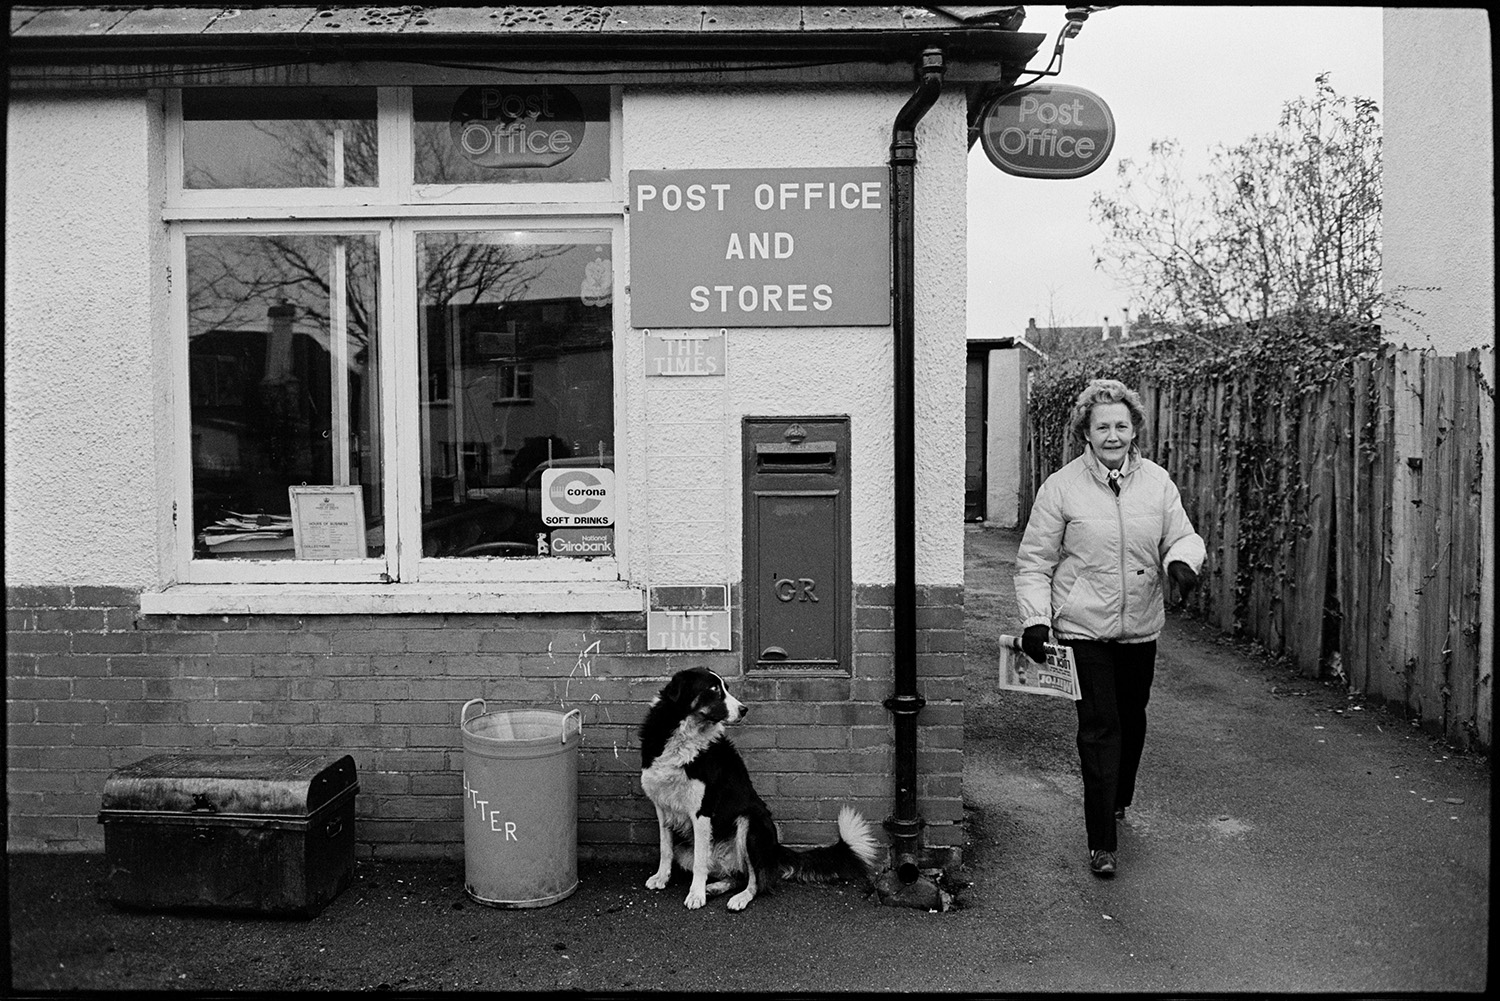 Milkman farmer on his last round in village, chatting as he delivers bottles from van.
[Woman holding a newspaper leaving Beaford Post Office and Stores. A post box is mounted in the wall and a dog, litter bin and a metal trunk are outside the shop window.]